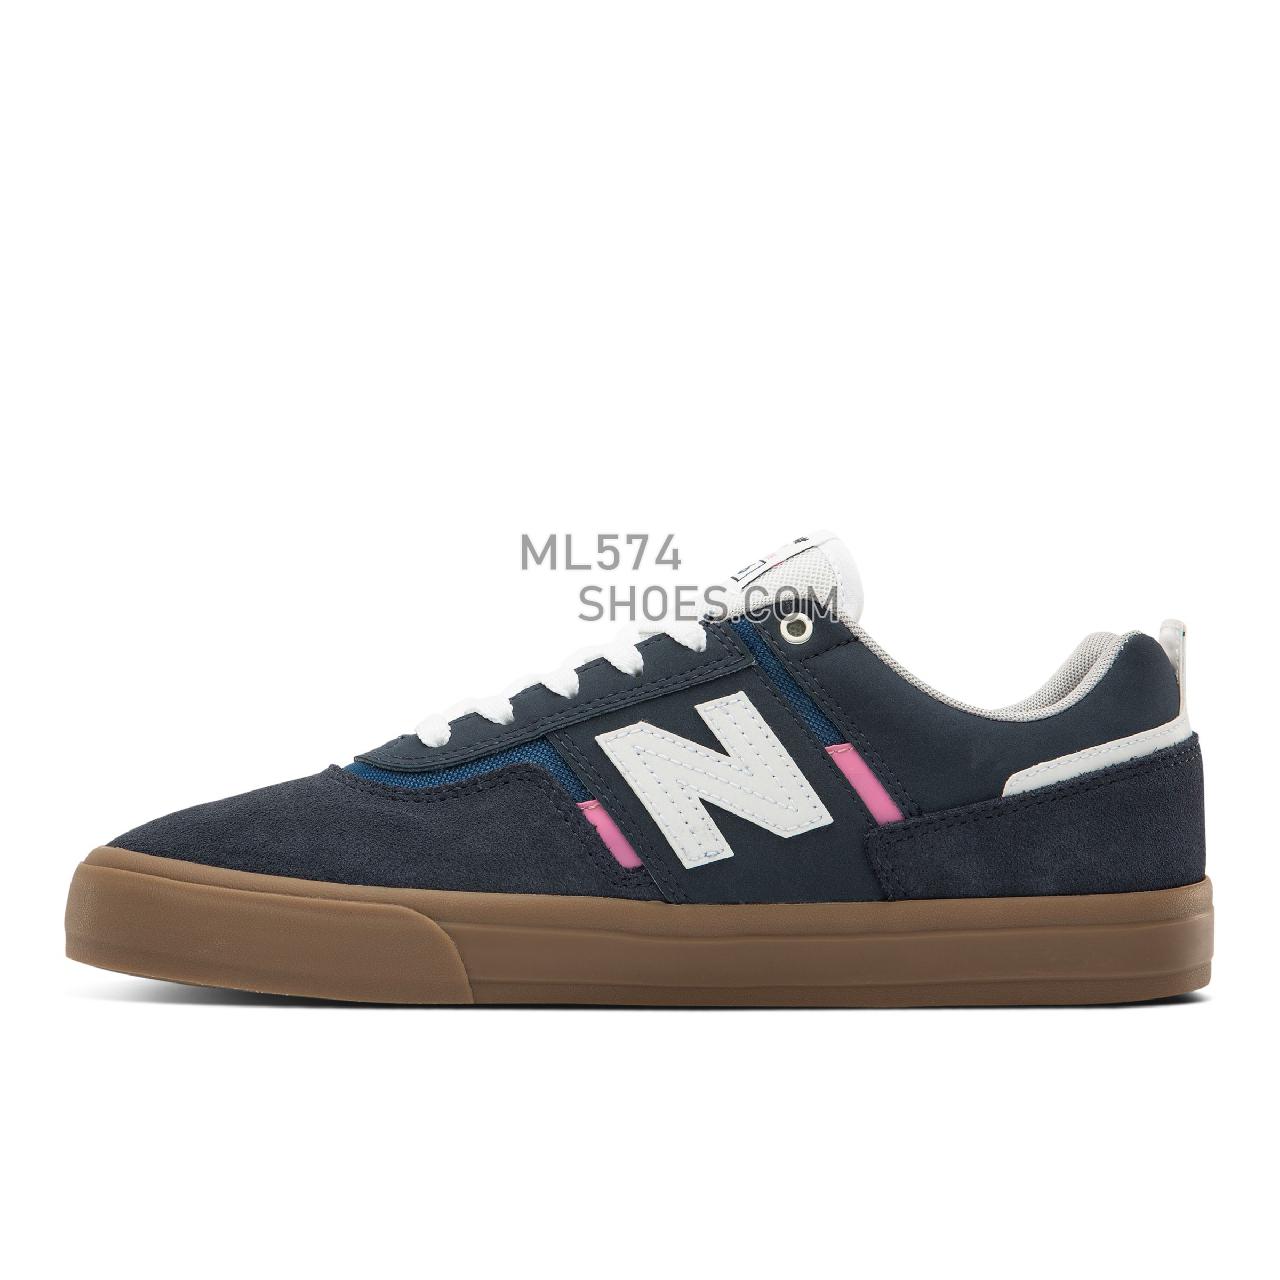 New Balance Numeric NM306 - Men's NB Numeric Skate - Navy with Pink - NM306IEN